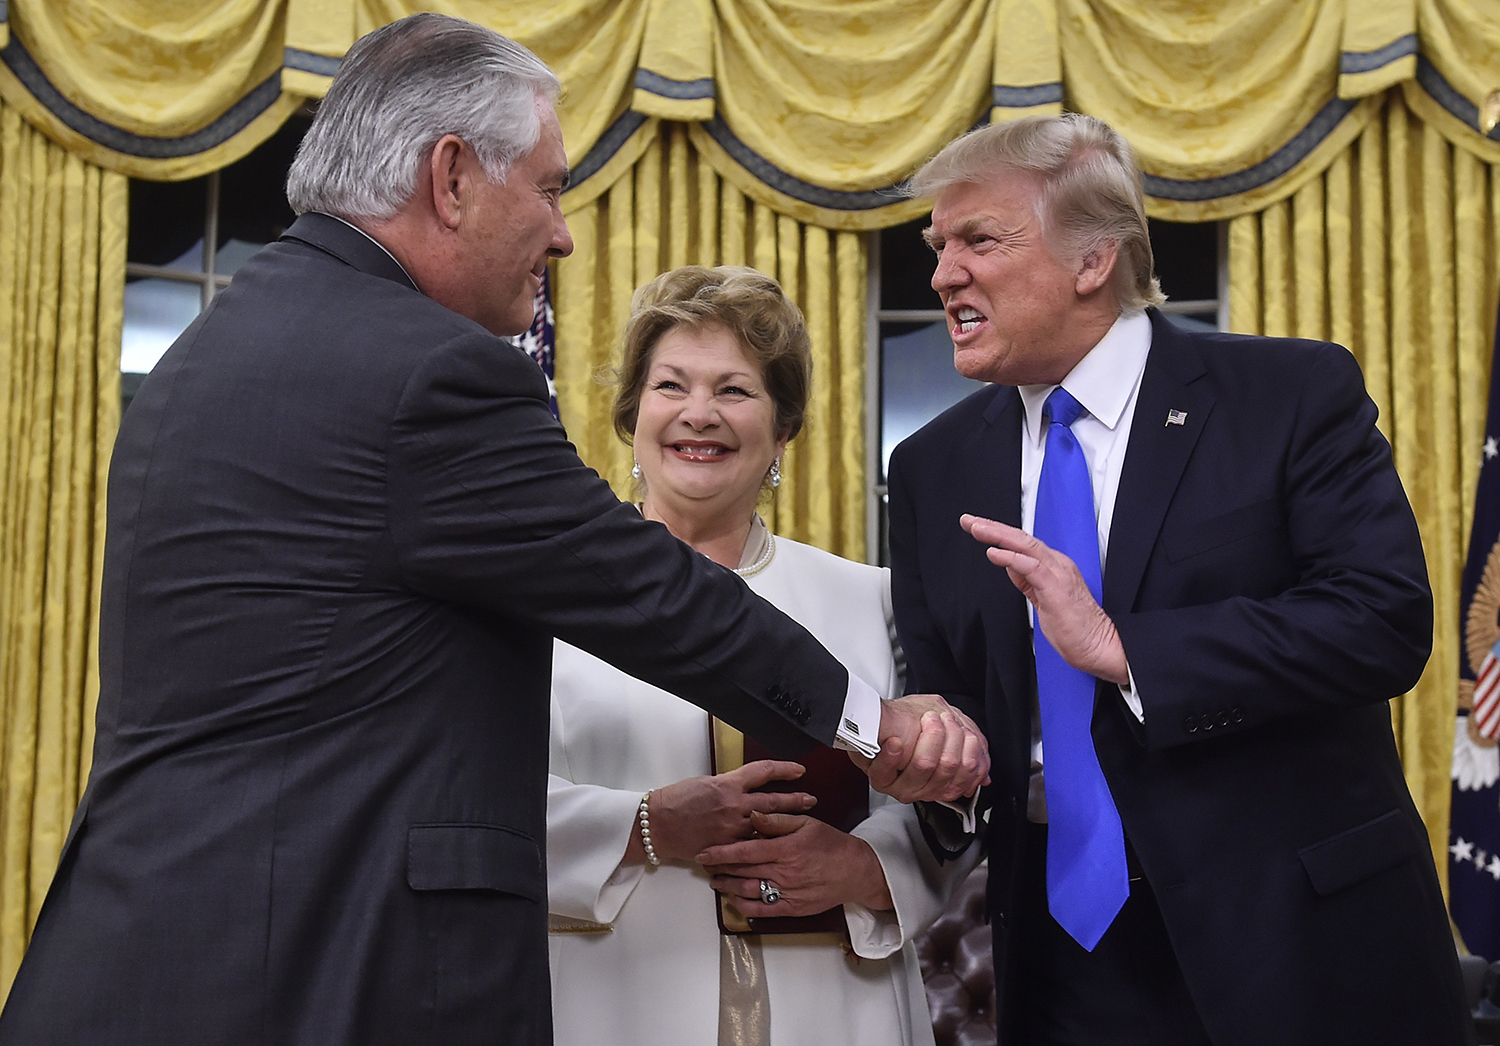 TOPSHOT - US President Donald Trump (R) shakes hands with Rex Tillerson (L) as Tillerson's wife Renda St. Clair look on after Tillerson was sworn in as Secretary of State in the Oval Office at the White House in Washington, DC, on February 1, 2017. President Trump notched a victory with confirmation of Rex Tillerson as his secretary of state, but opposition Democrats girded for battle over several other nominations, including his pick for the US Supreme Court. / AFP PHOTO / NICHOLAS KAMM / TT / kod 444